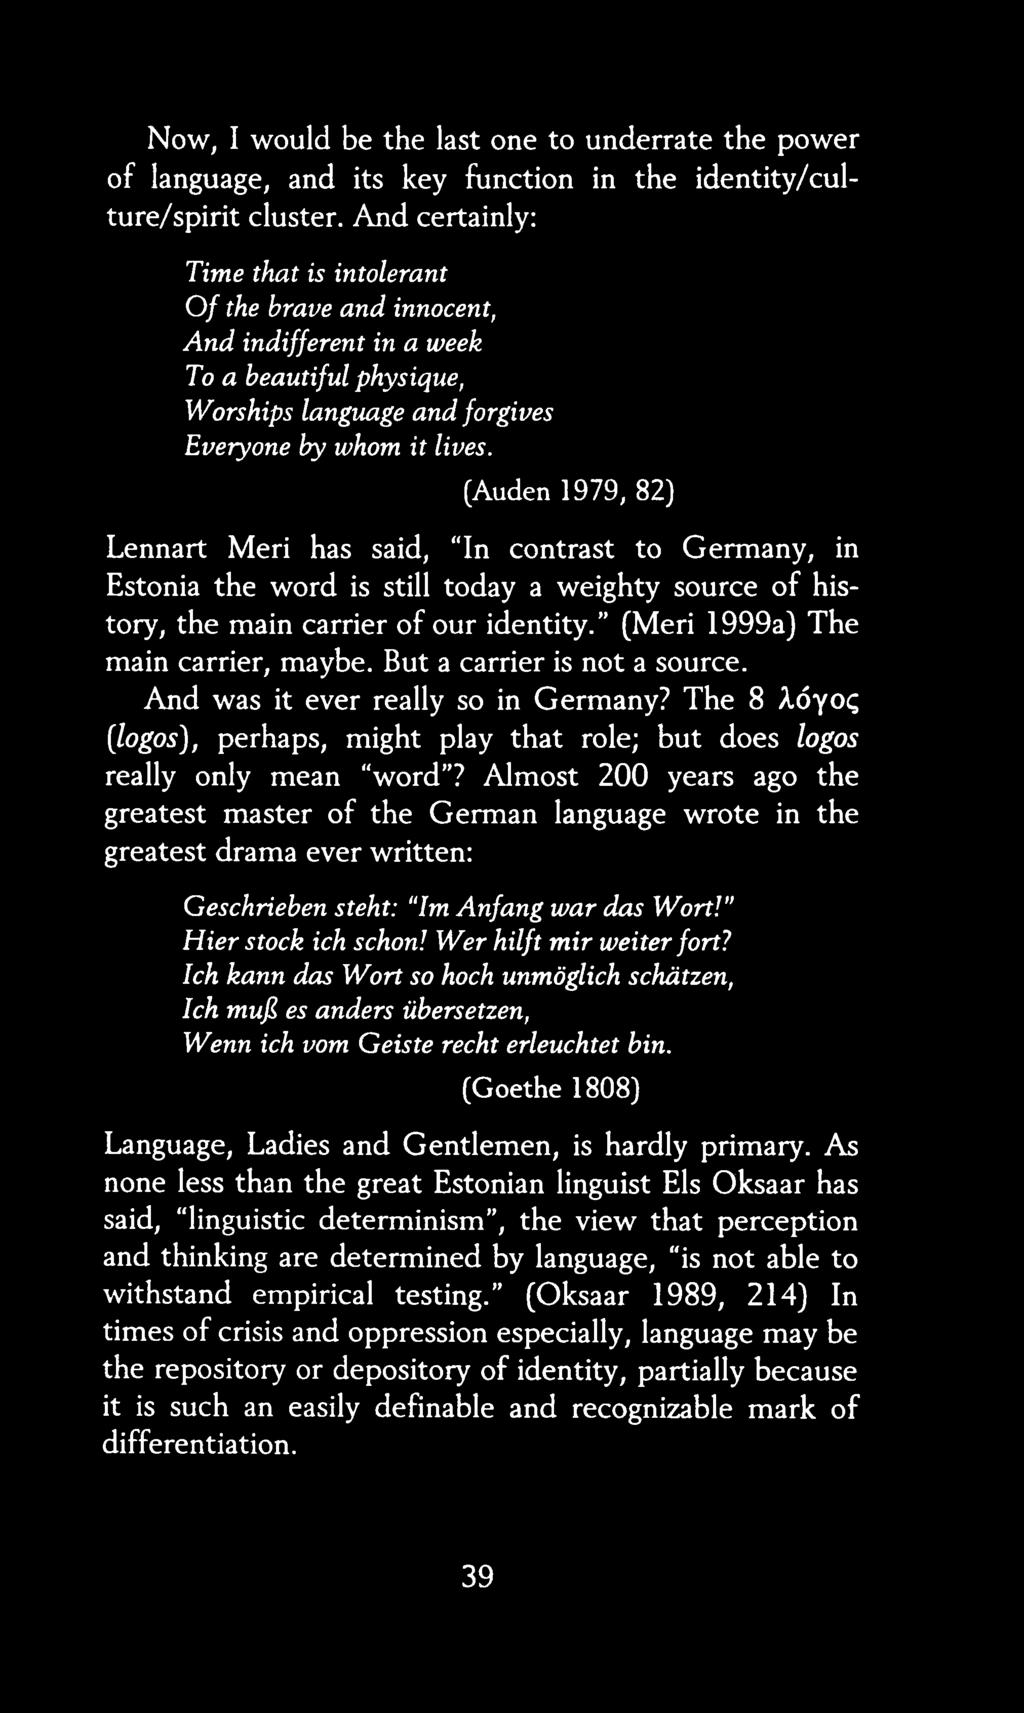 (Auden 1979, 82) Lennart Meri has said, In contrast to Germany, in Estonia the word is still today a weighty source of history, the main carrier of our identity. (Meri 1999a) The main carrier, maybe.